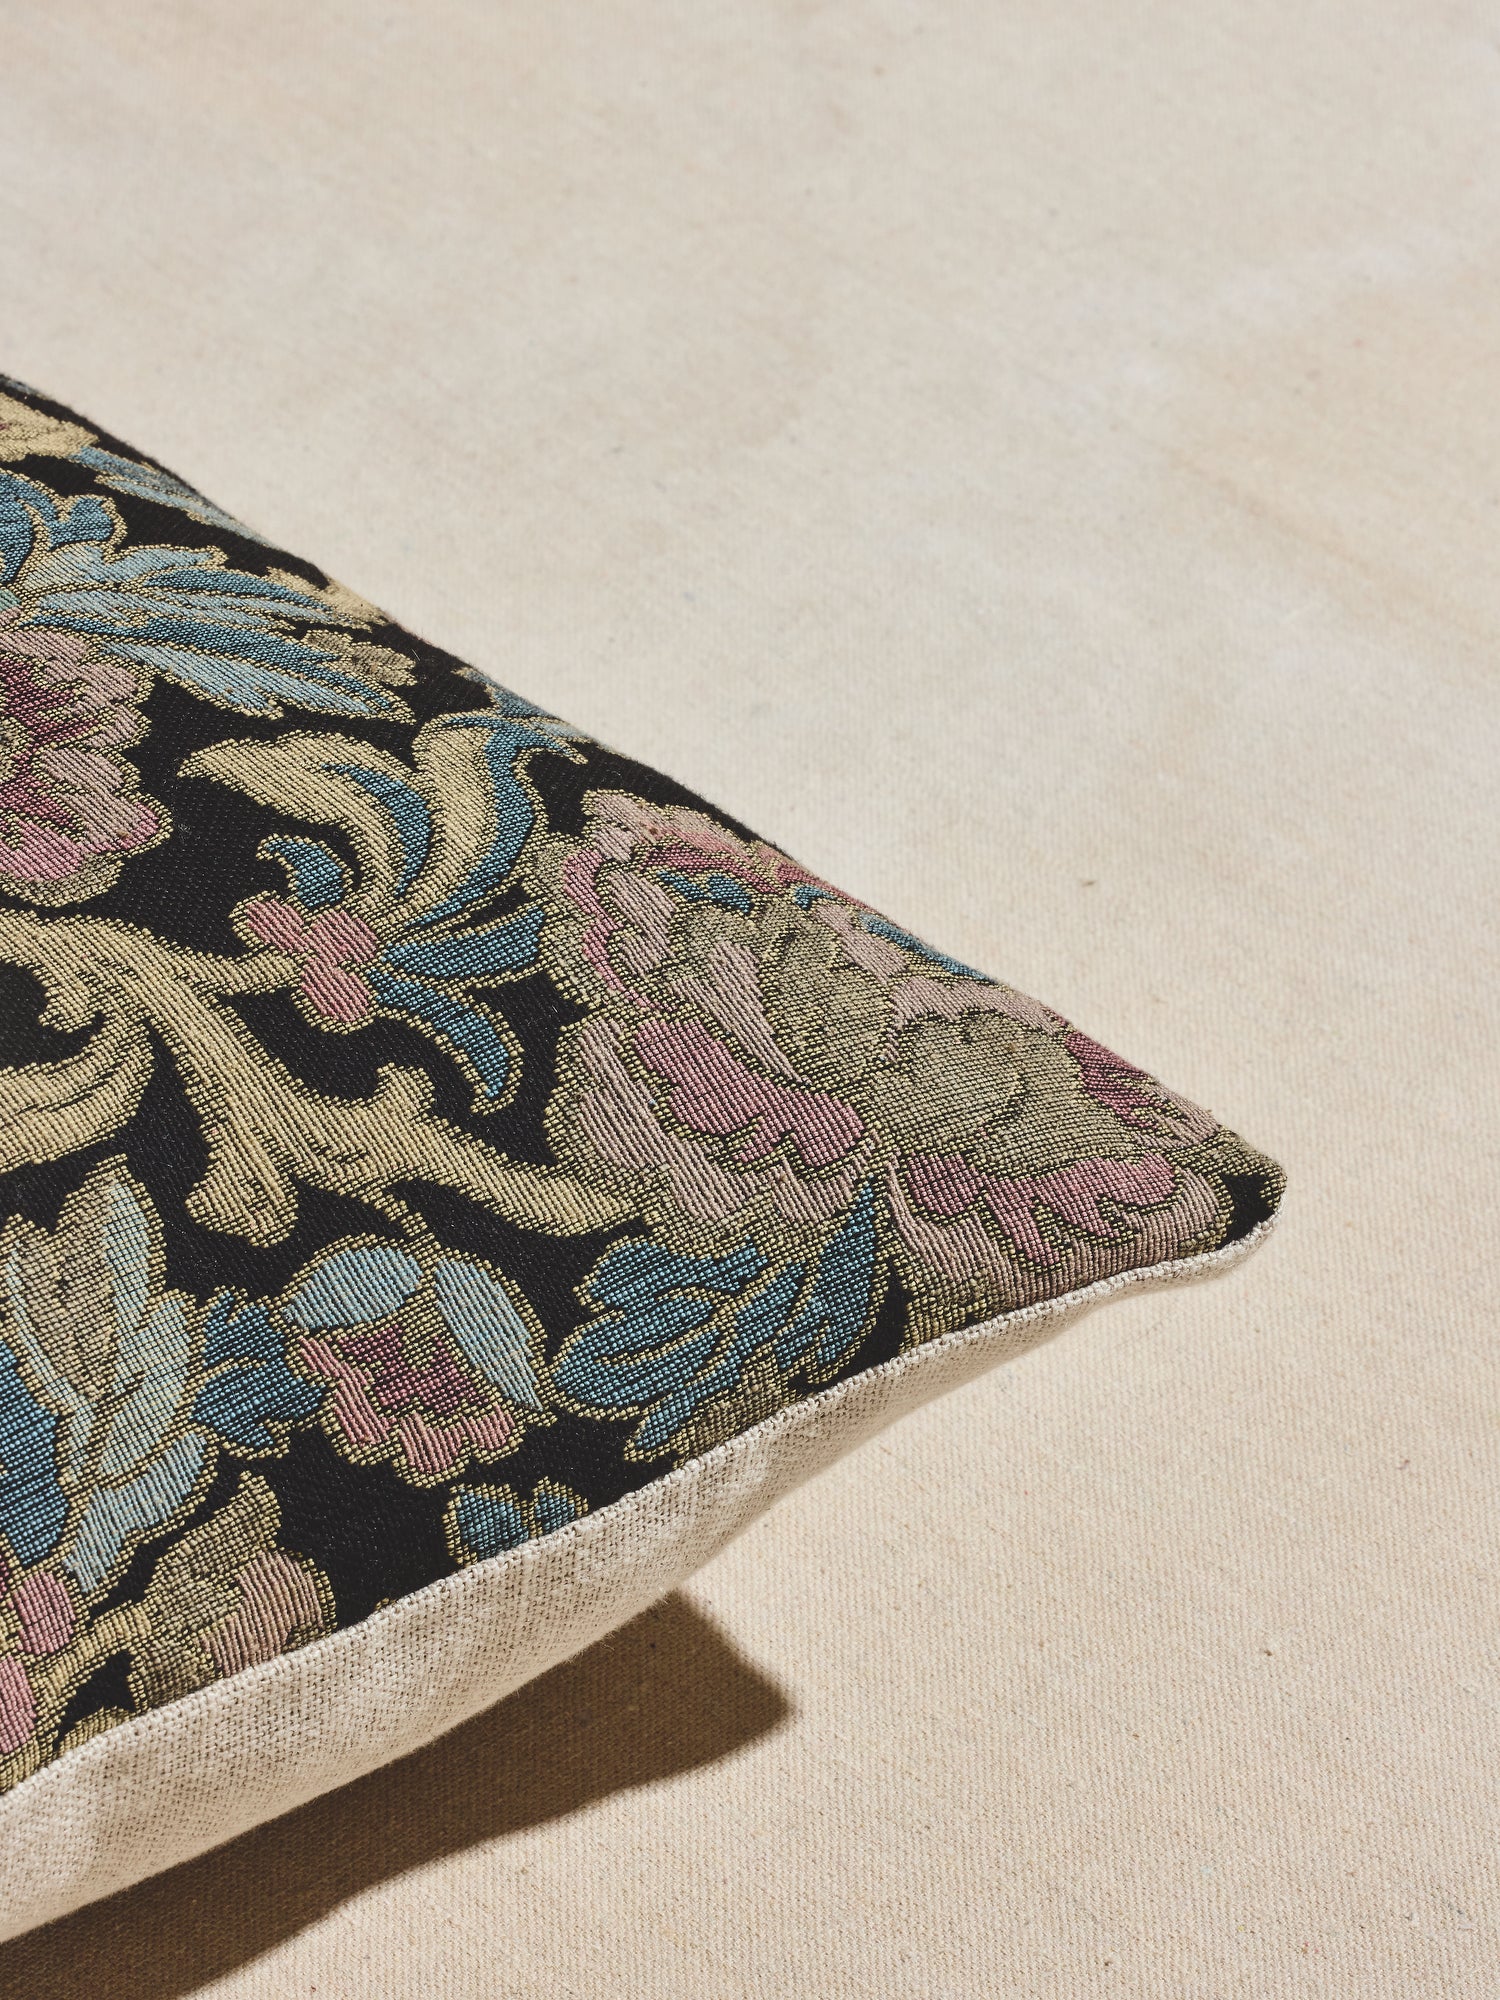 Close up of nightshade woven floral pillow with cool tones of navy, light blue, gold, and pale pinks.